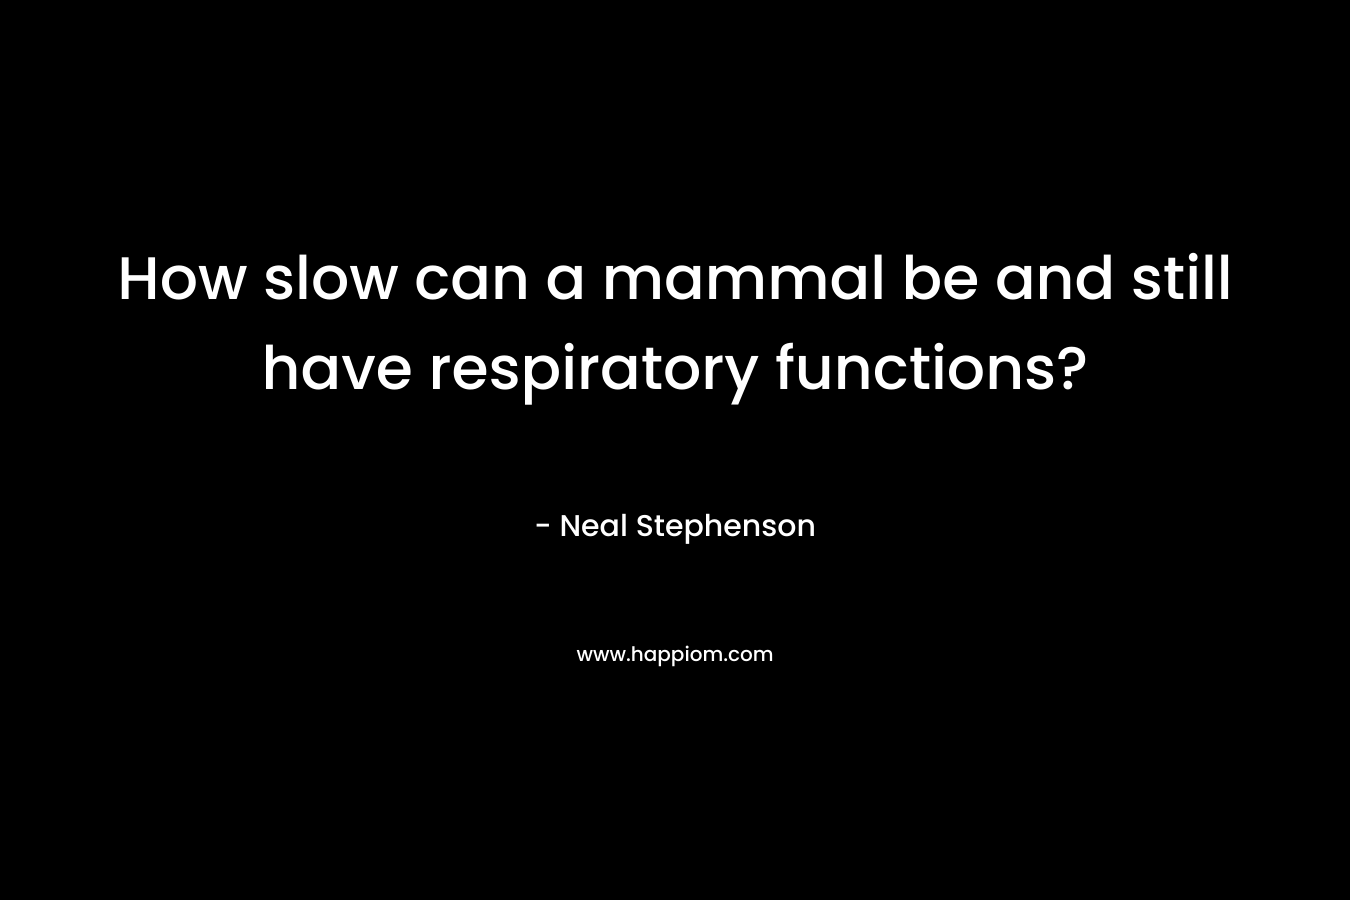 How slow can a mammal be and still have respiratory functions? – Neal Stephenson